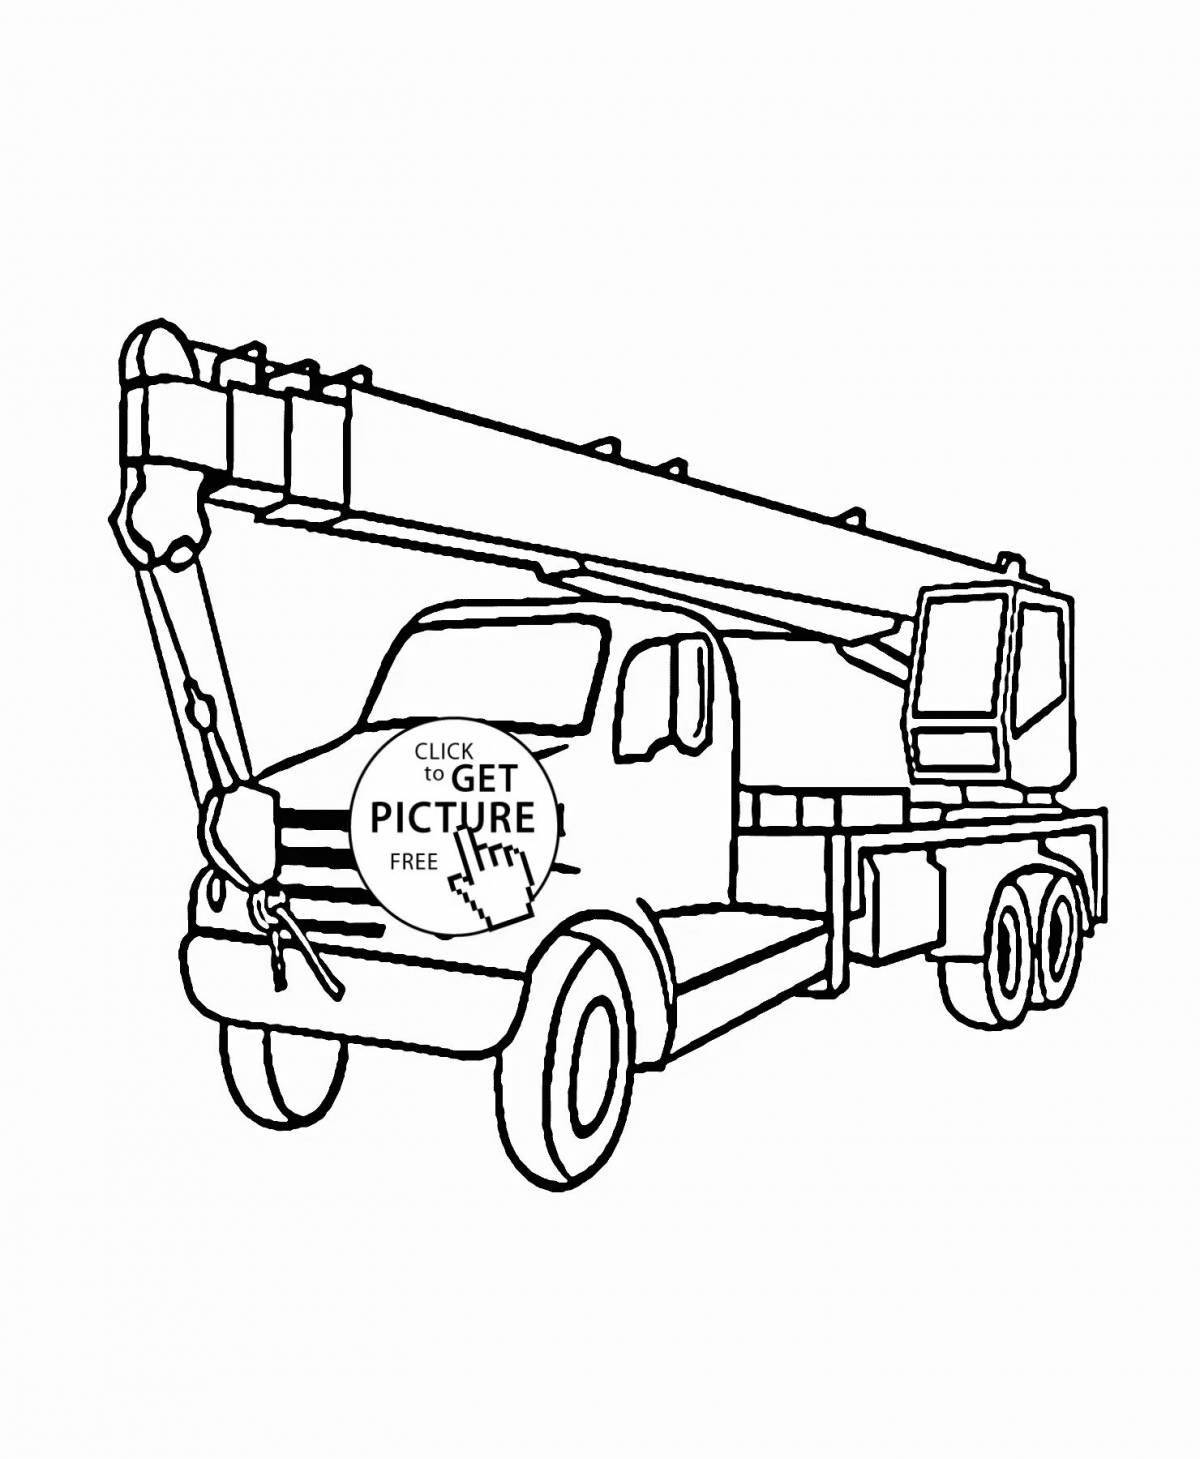 Glamorous crane truck coloring book for kids